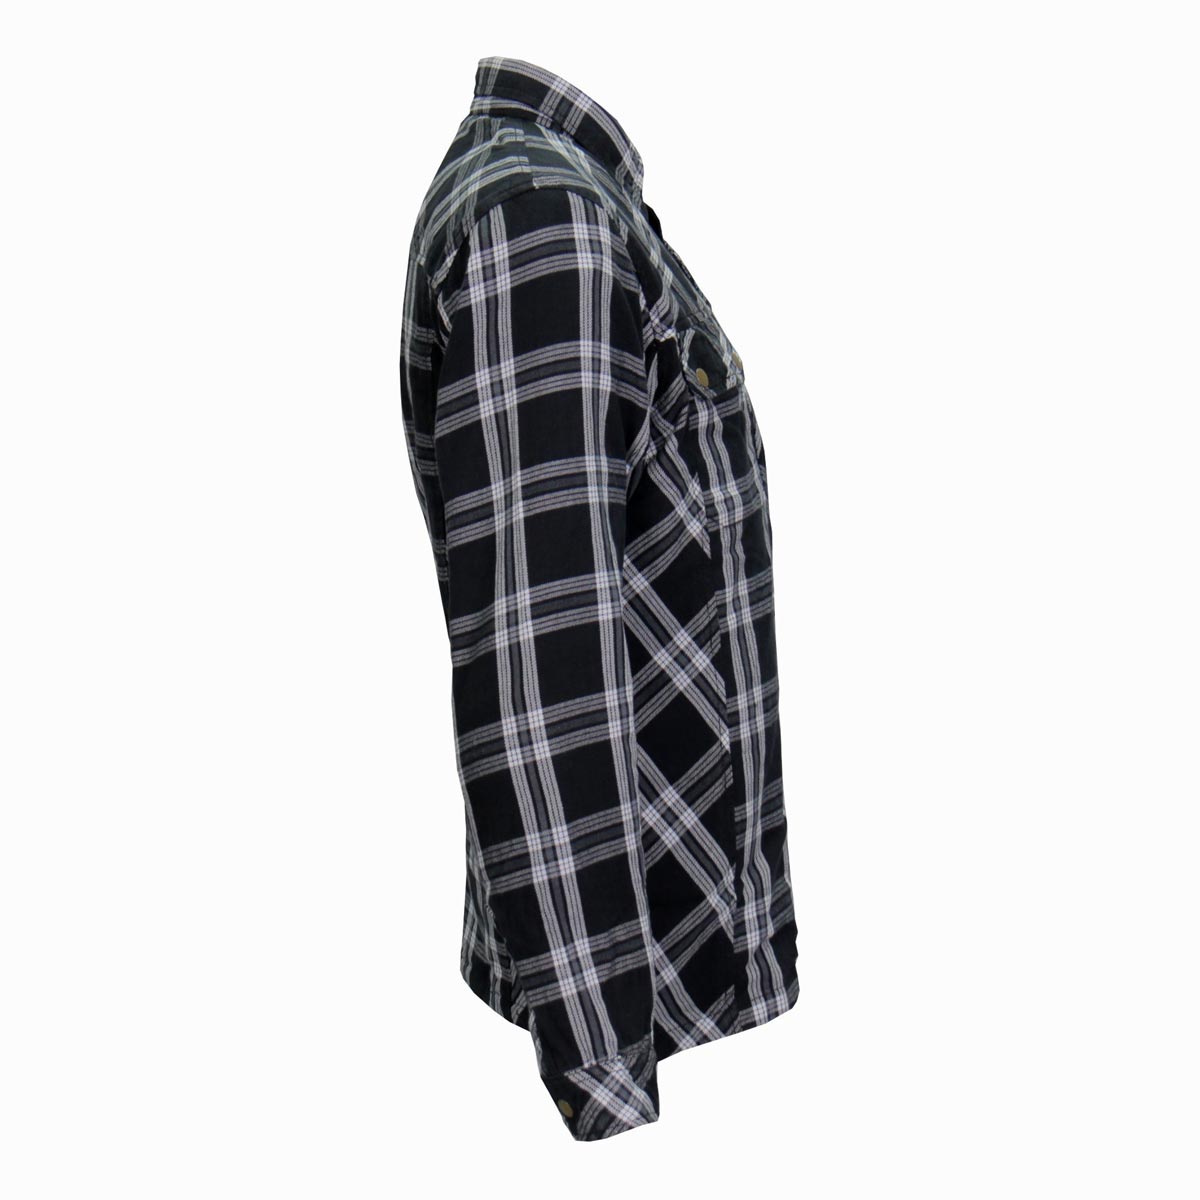 Hot Leathers JKM3002 Men's Black and White Flannel Motorcycle Shirt-Jacket w/ CE Armor Protection